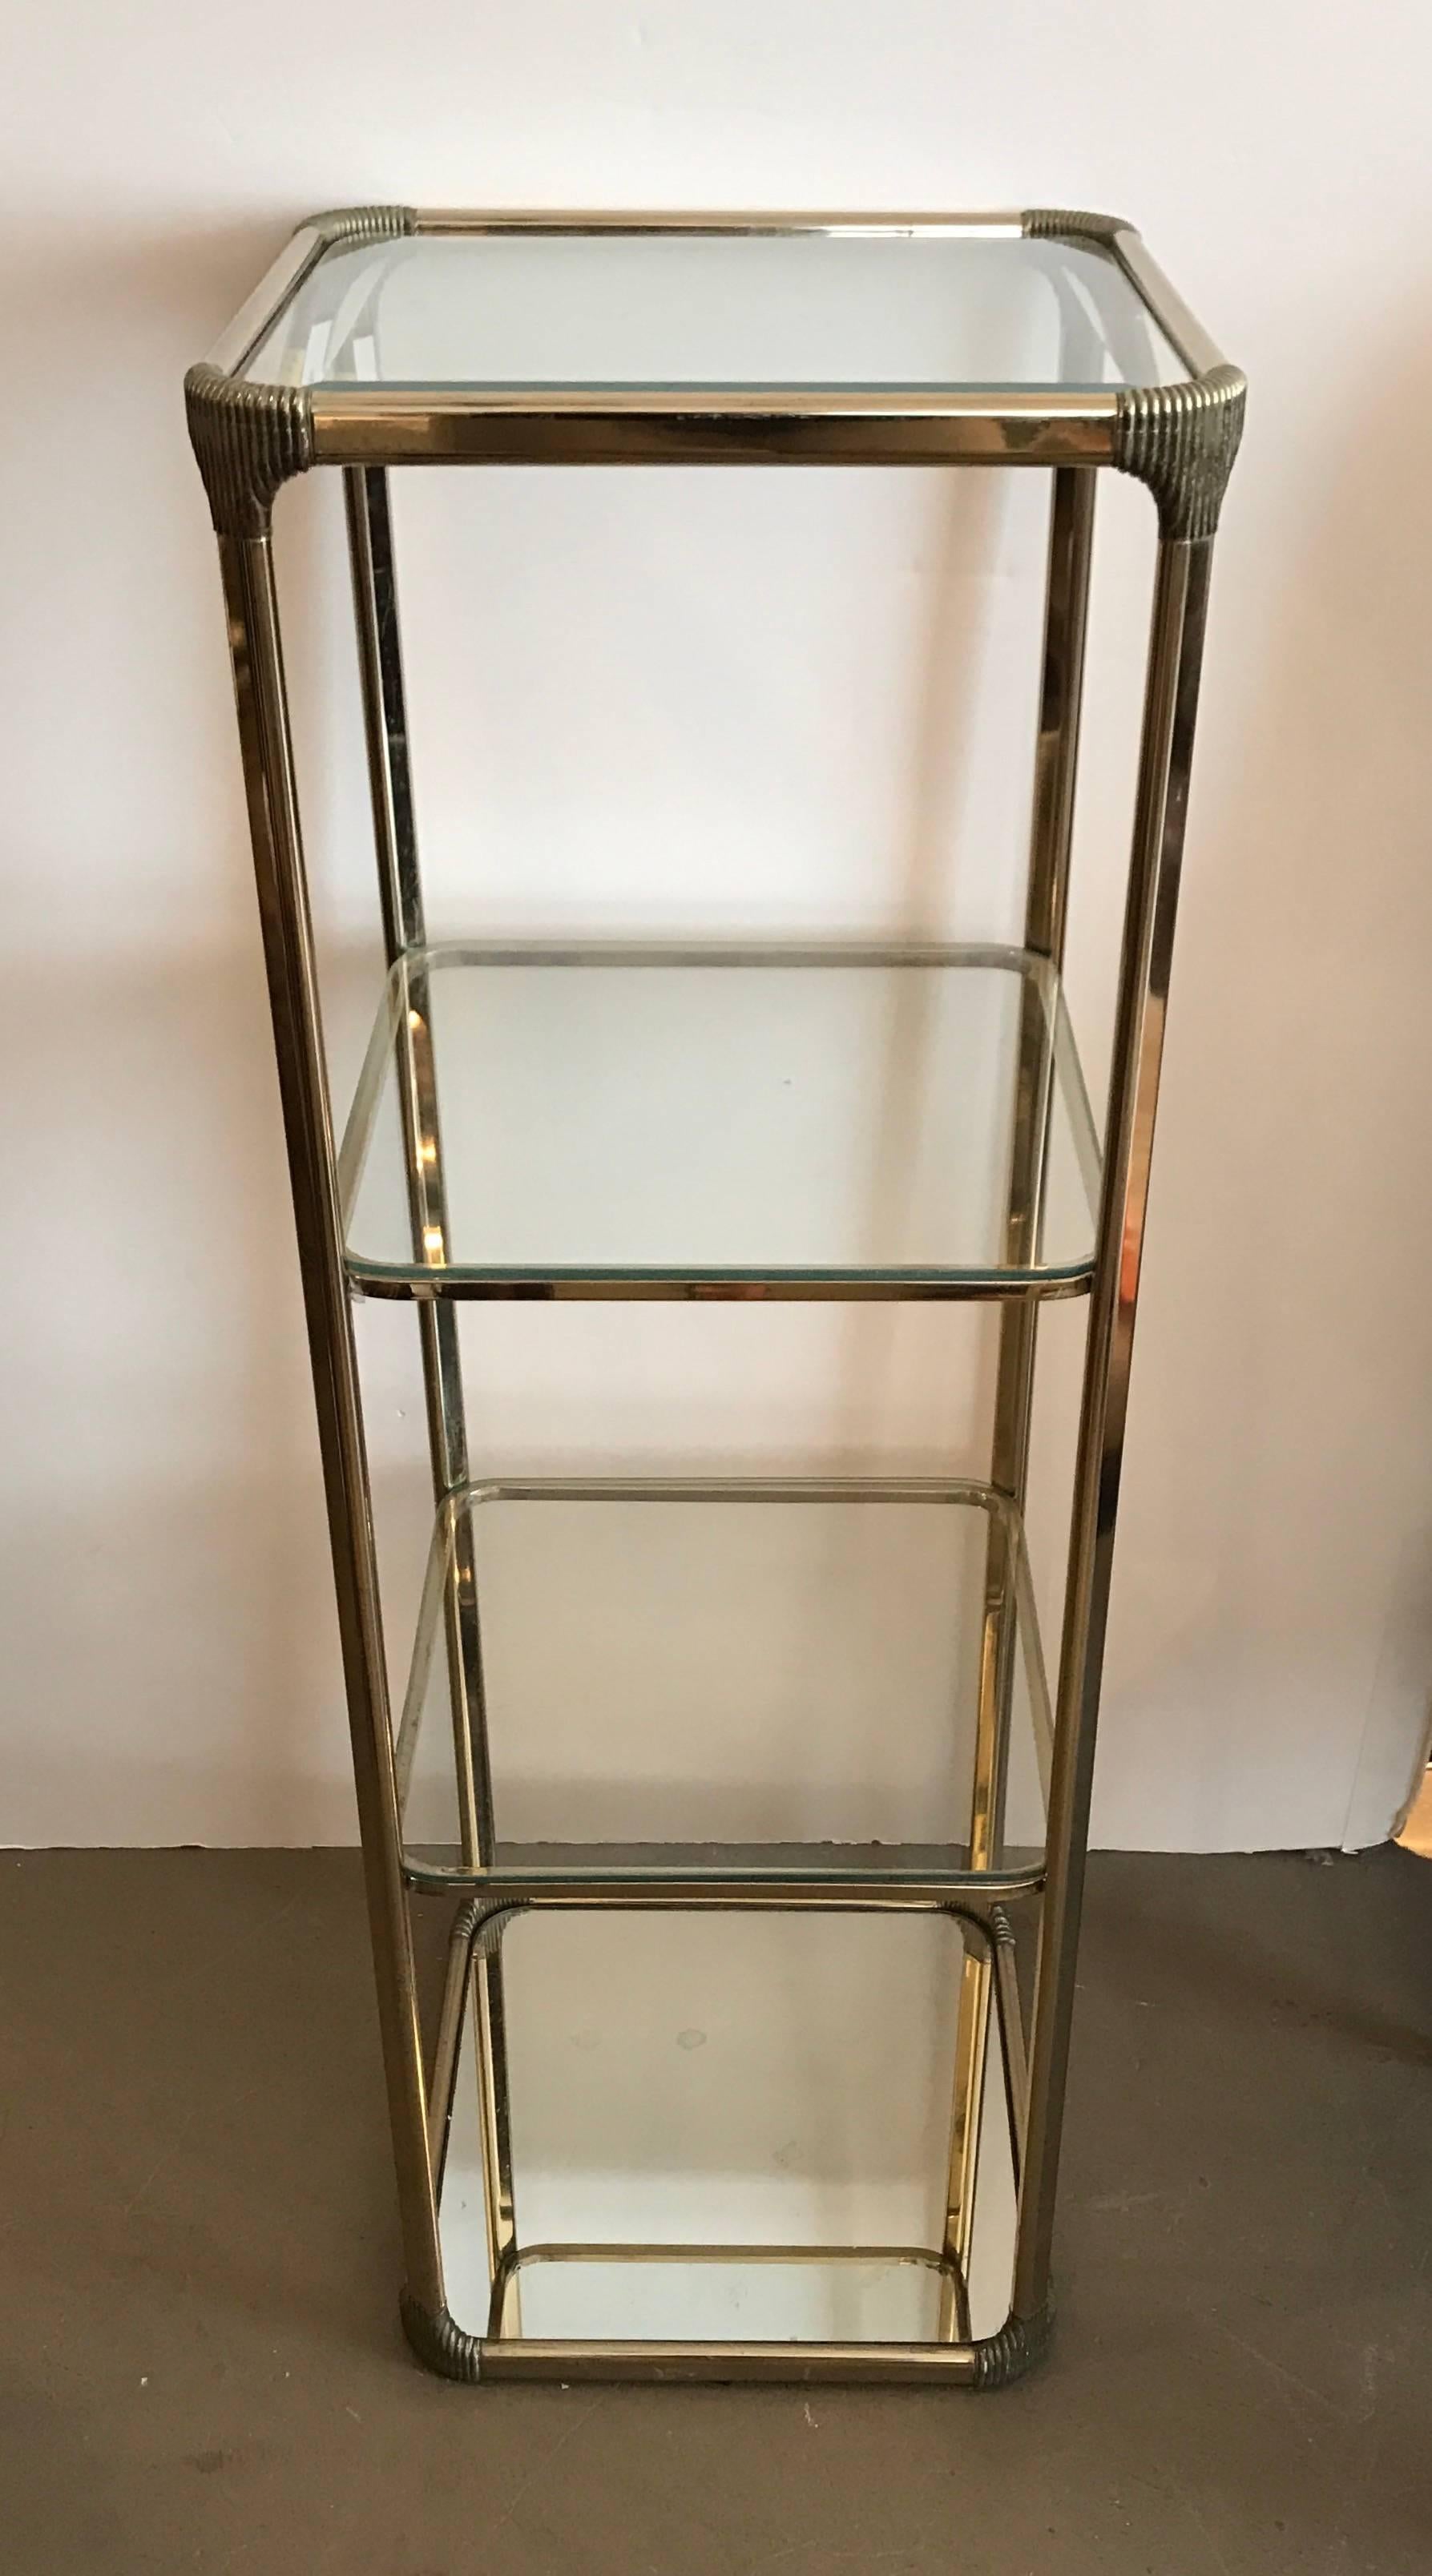 Vintage French etagere with glass shelves and mirrored base.